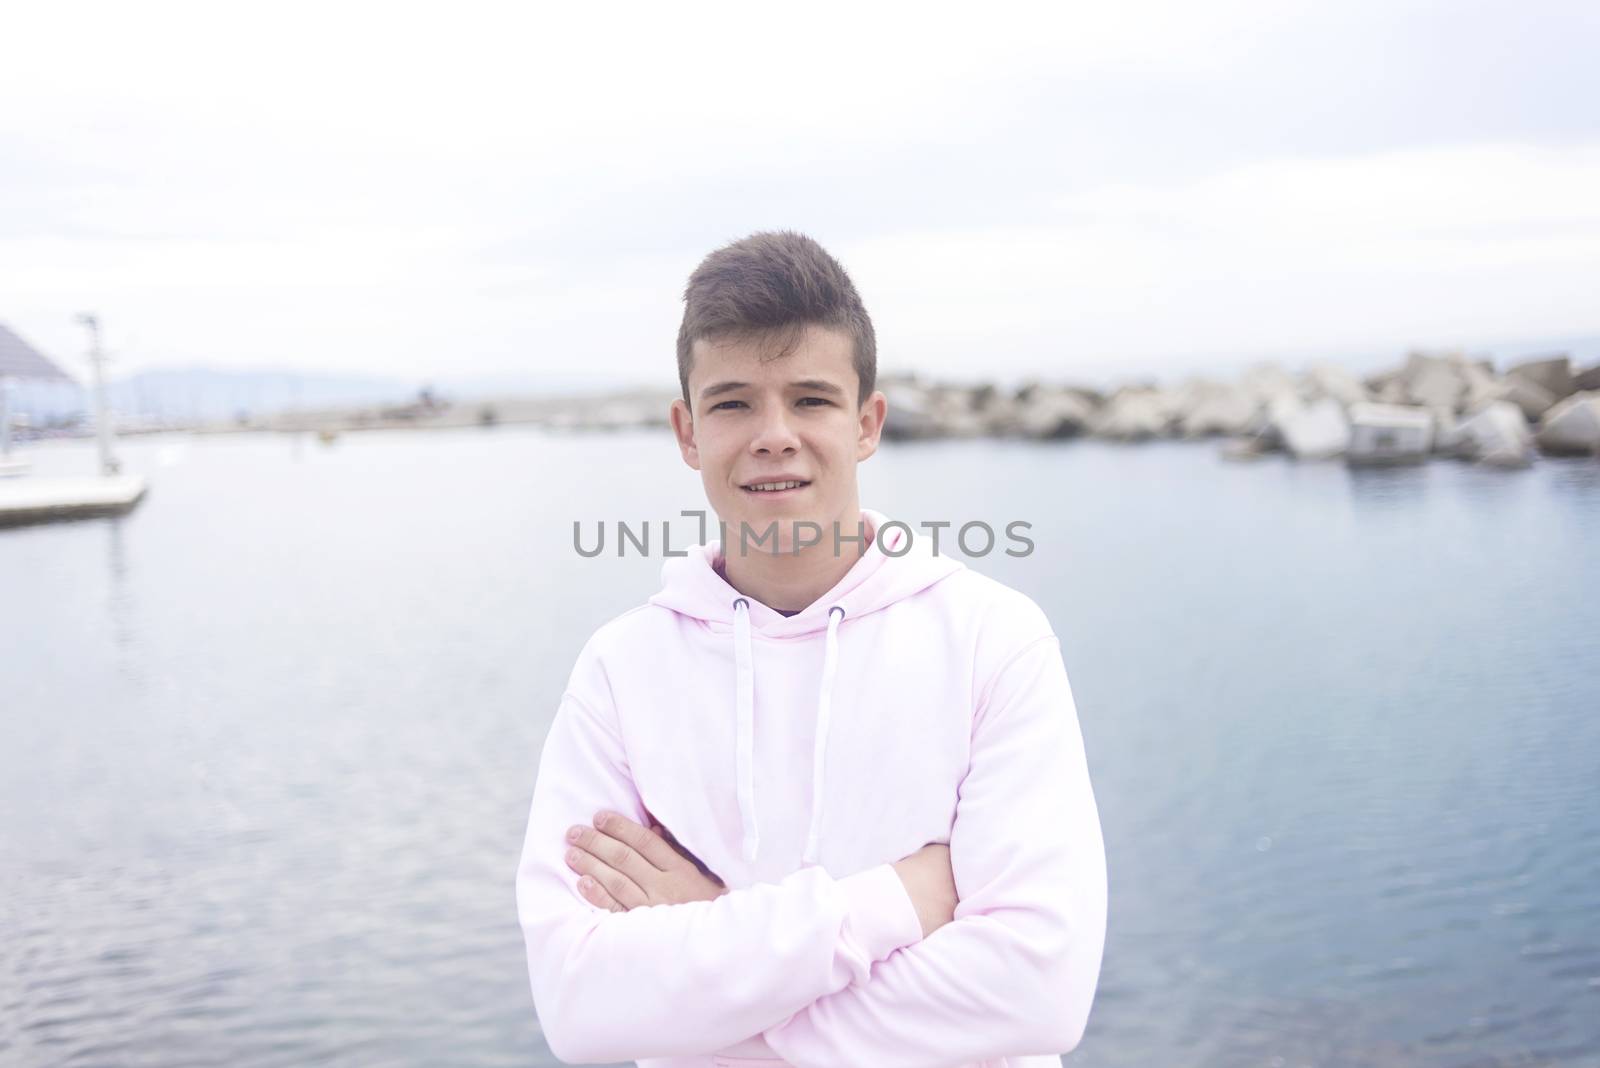 Young teenager male with crossing arms standing on promenade while looking at camera by raferto1973